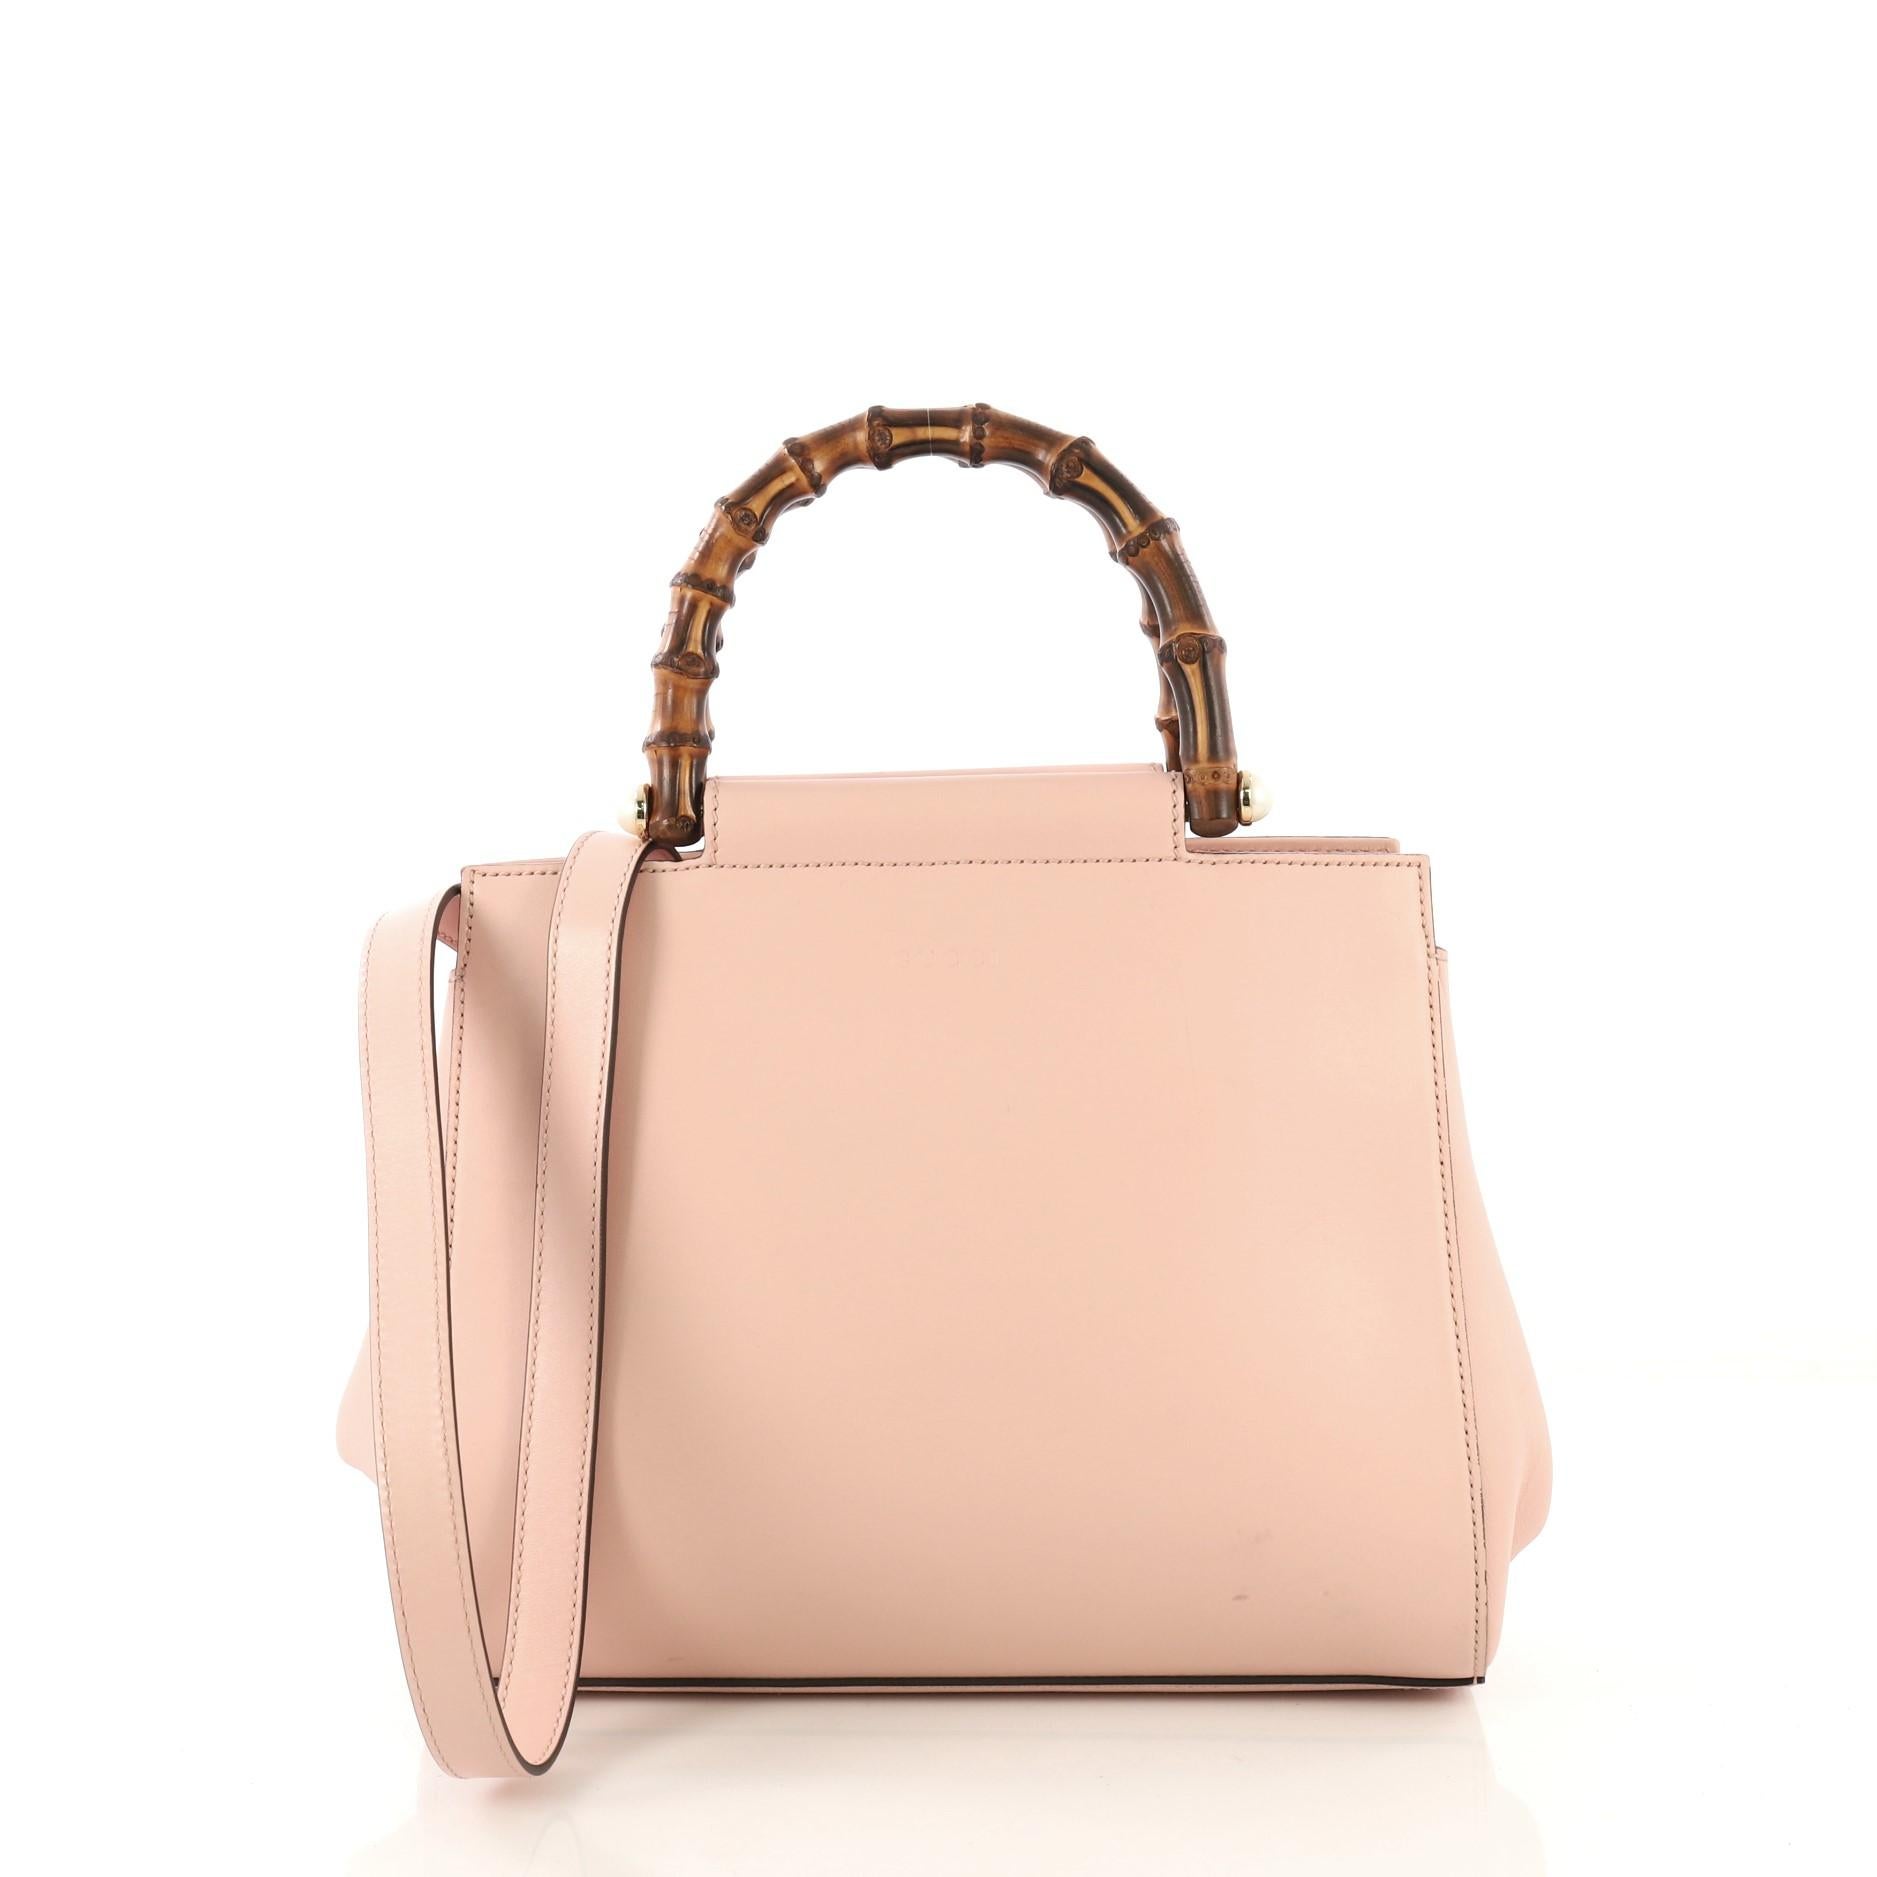 This Gucci Nymphaea Tote Leather Small, crafted in pink leather, features dual bamboo handles and gold-tone hardware. Its snap closure opens to a gray microfiber interior with zip and slip pockets.

Estimated Retail Price: $2,100
Condition: Good.